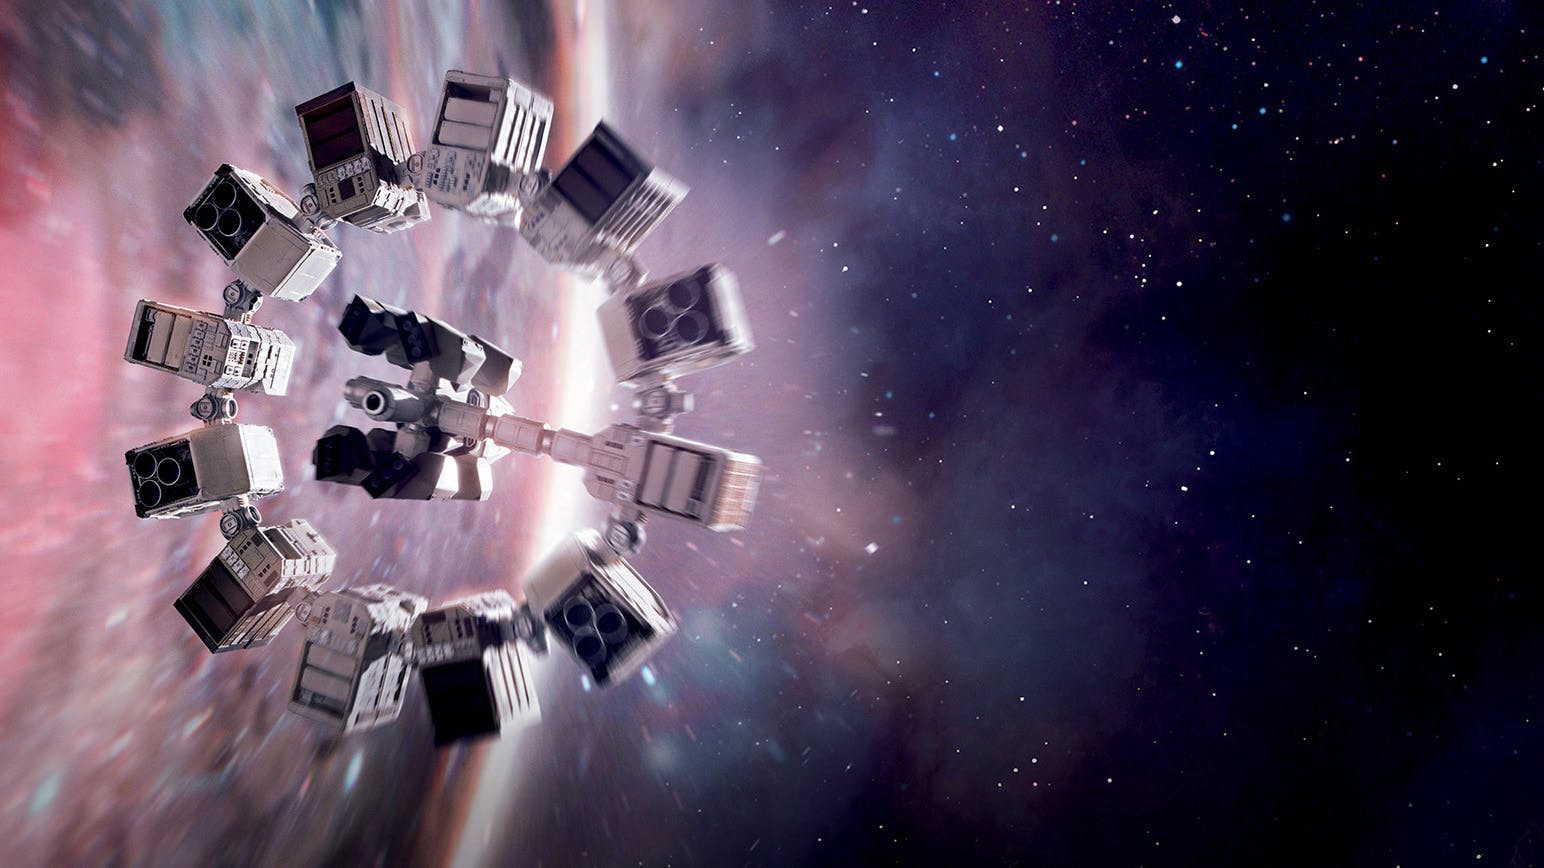 Interstellar left you baffled? Allow us to help picture